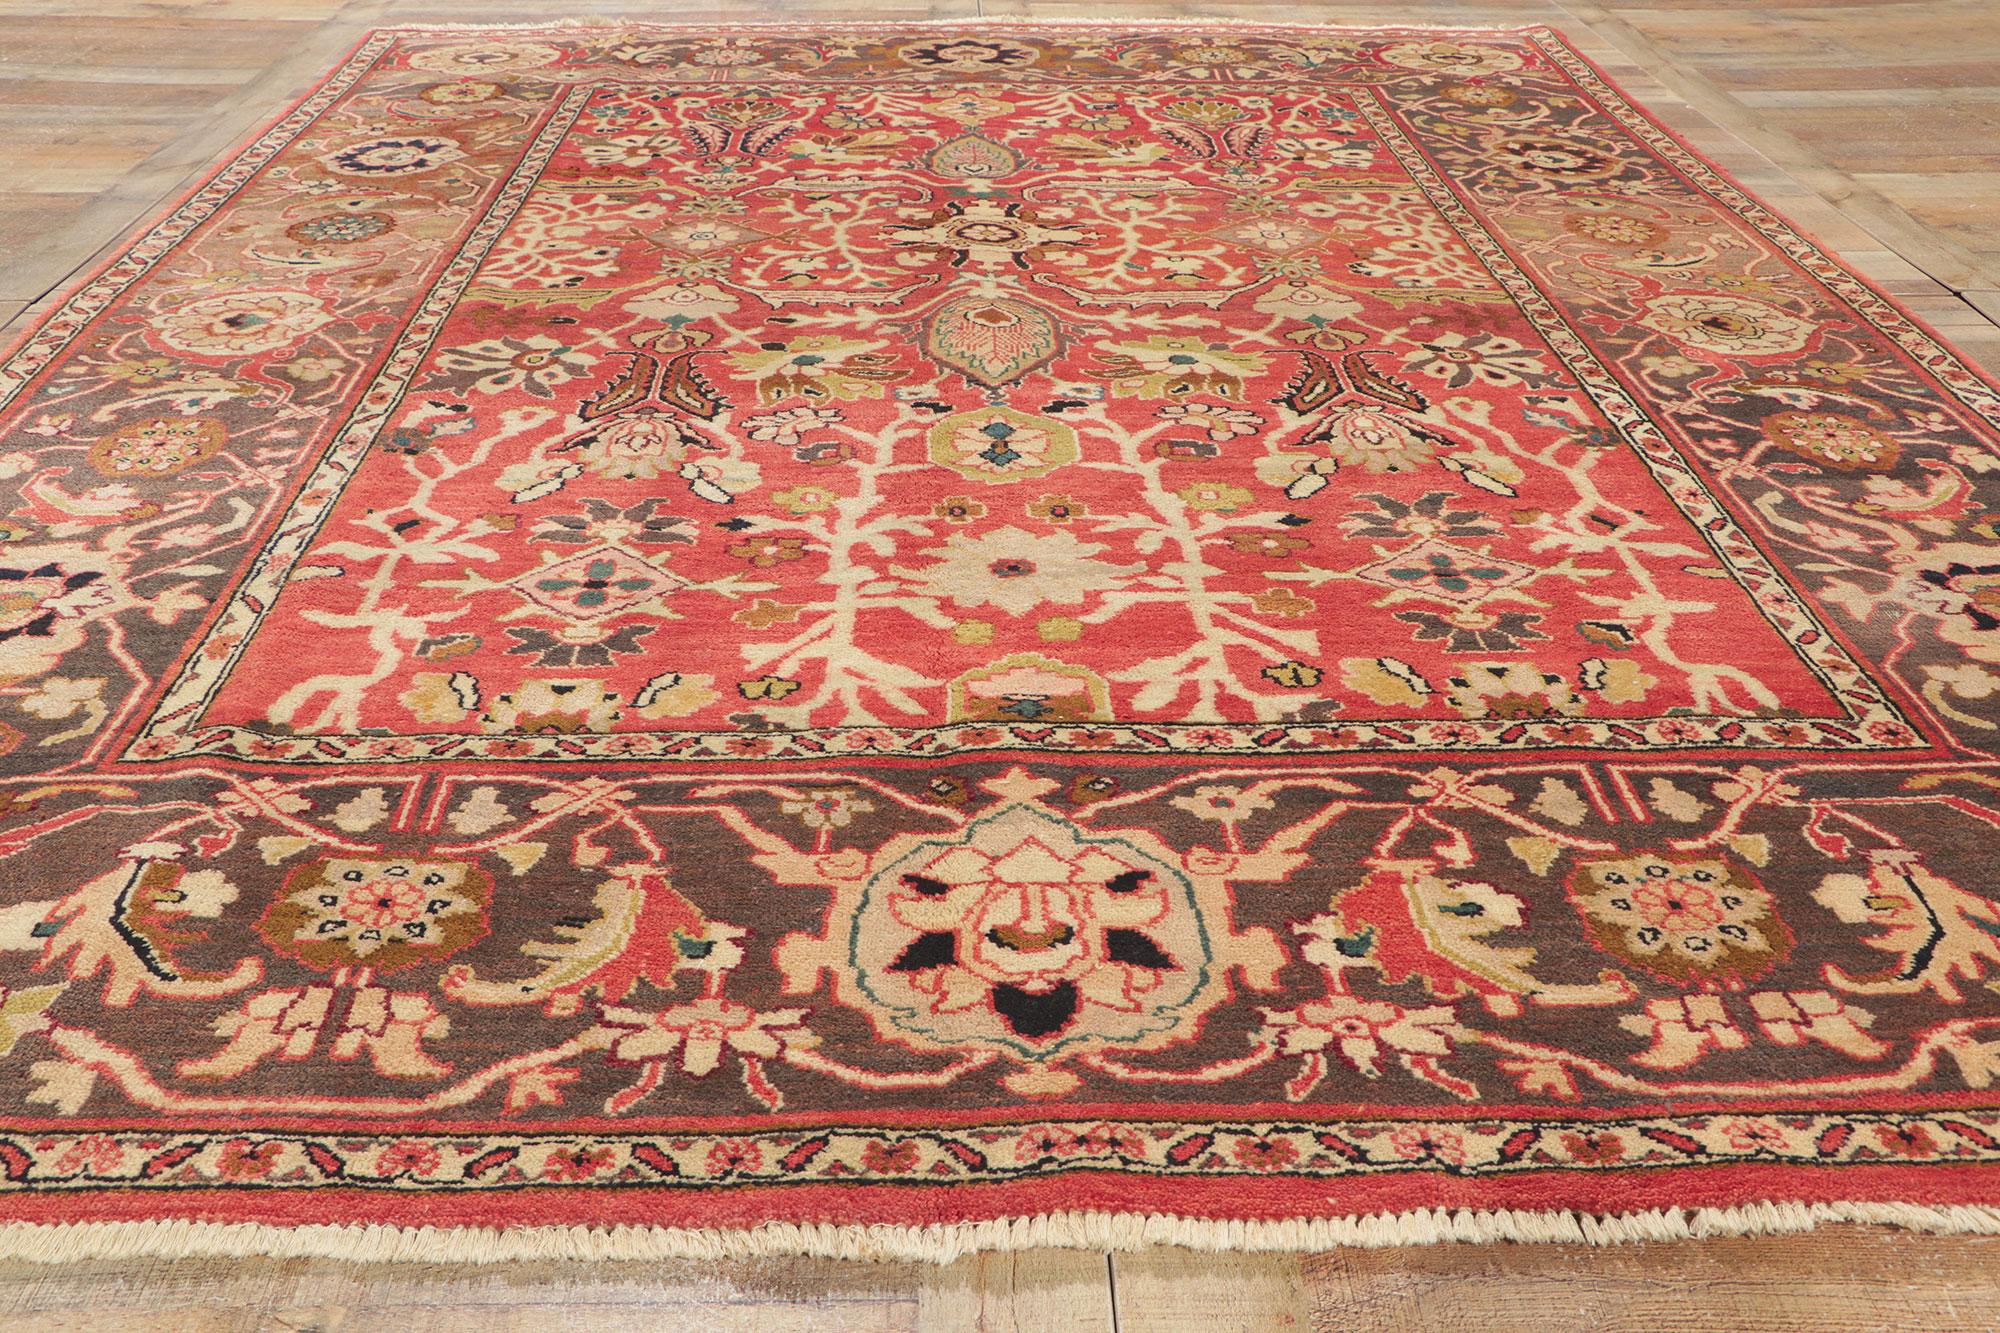 Vintage Indian Mahal Rug with Warm Earth-Tone Colors For Sale 1